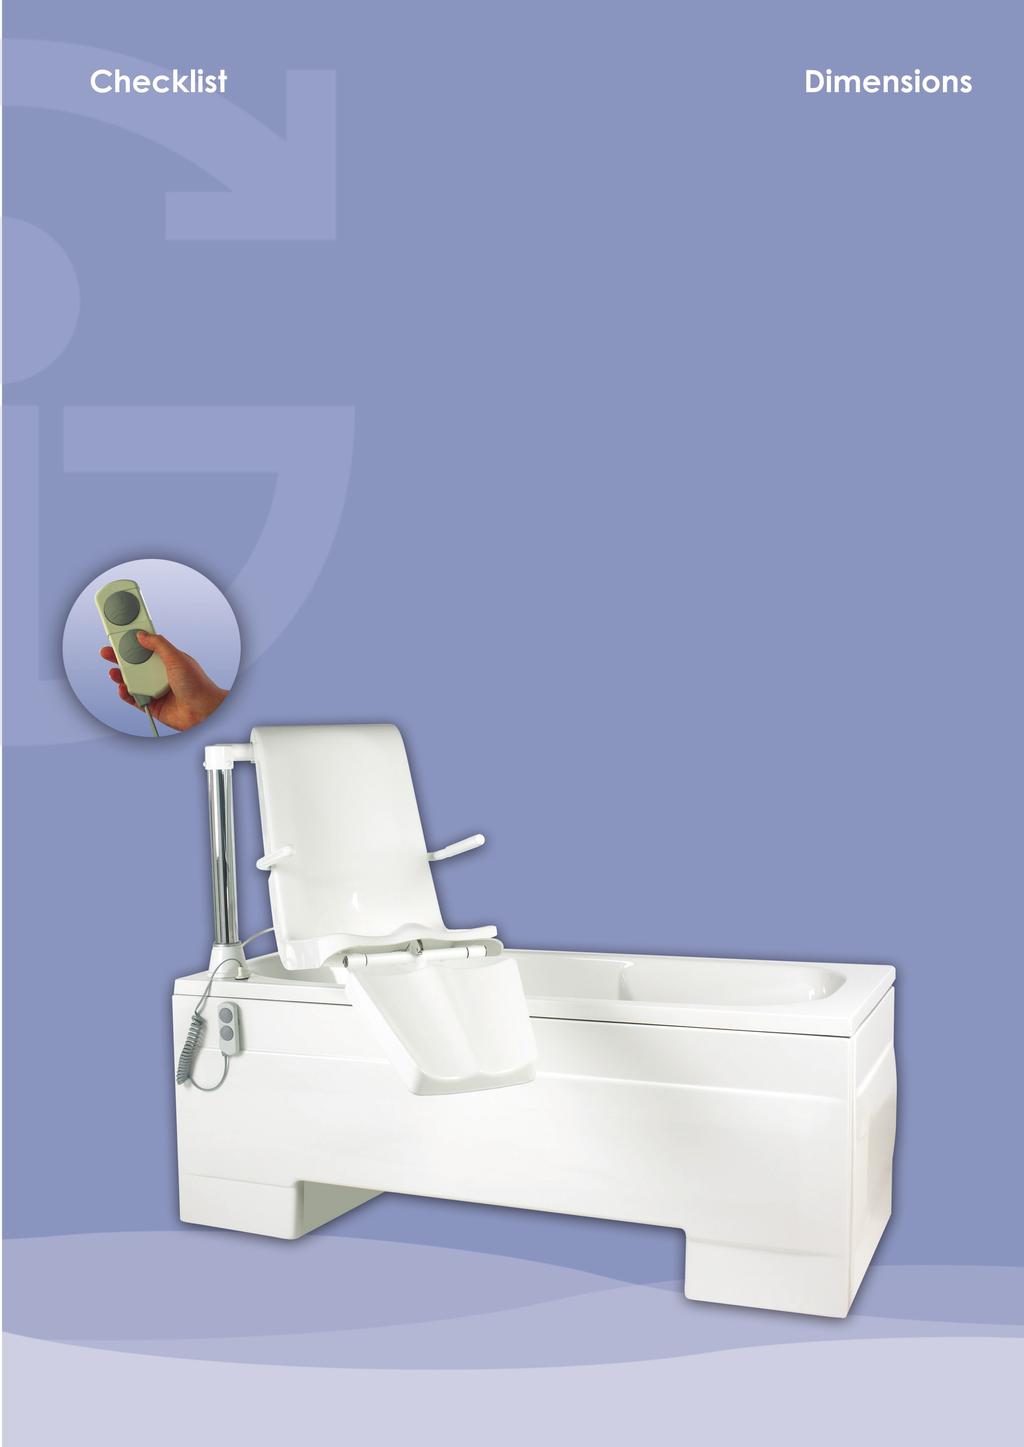 1500mm and 1700mm length baths available Battery back-up as standard Unique leg-lifting facility 24 stone (150kg) lifting capacity Smooth easy clean surfaces Choice of folding